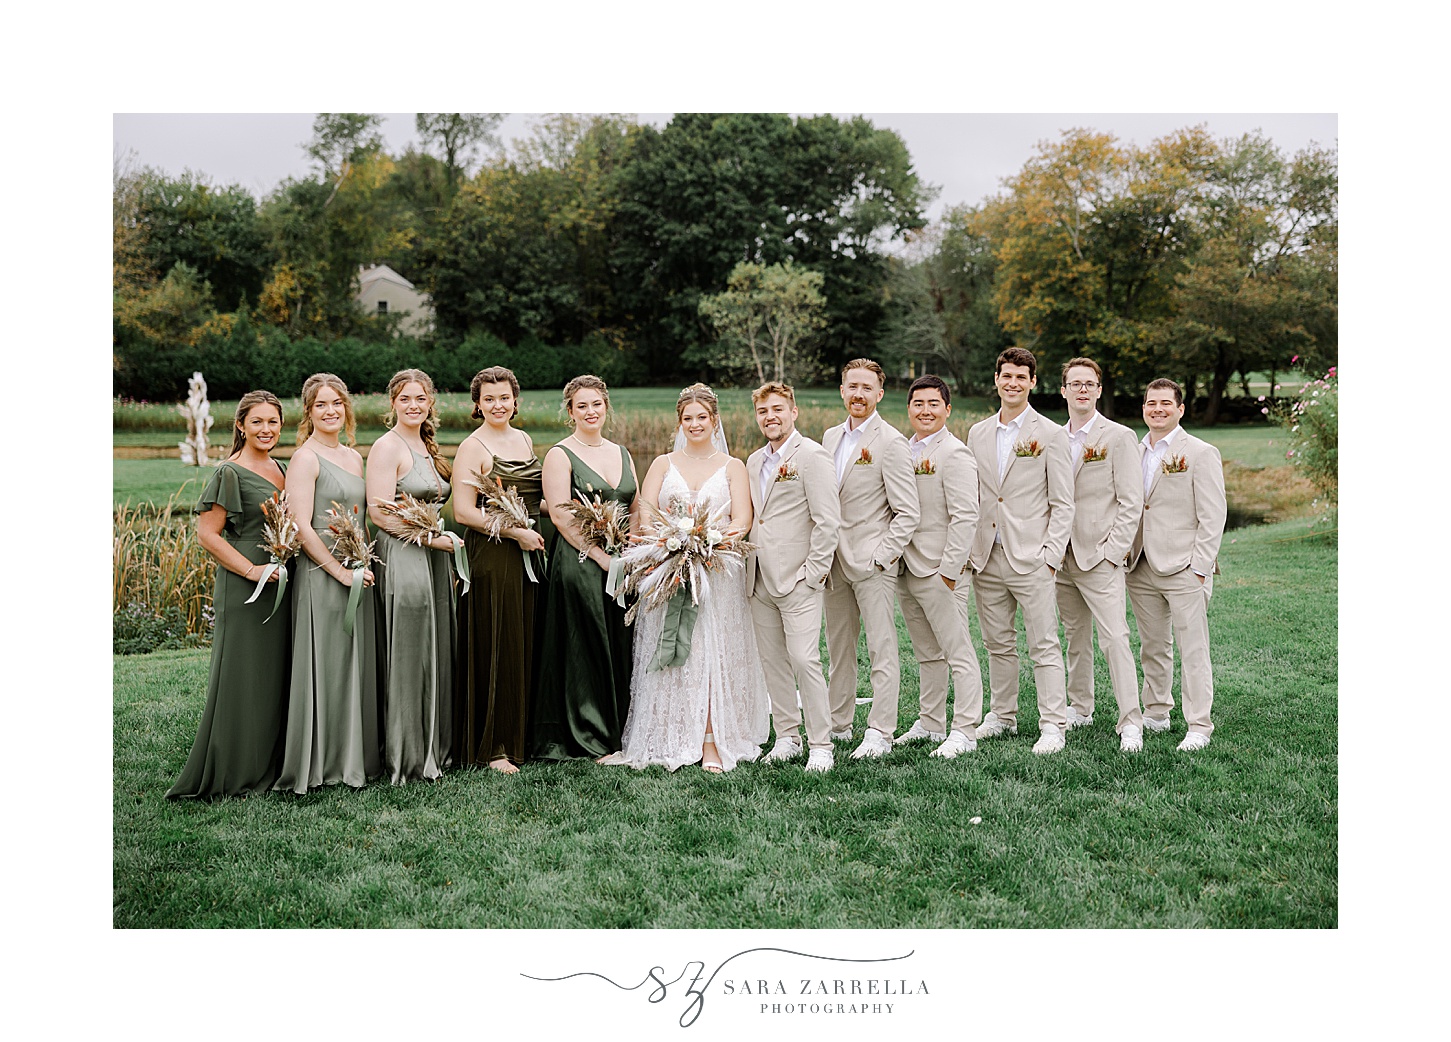 newlyweds stand with wedding party in tan and green attire